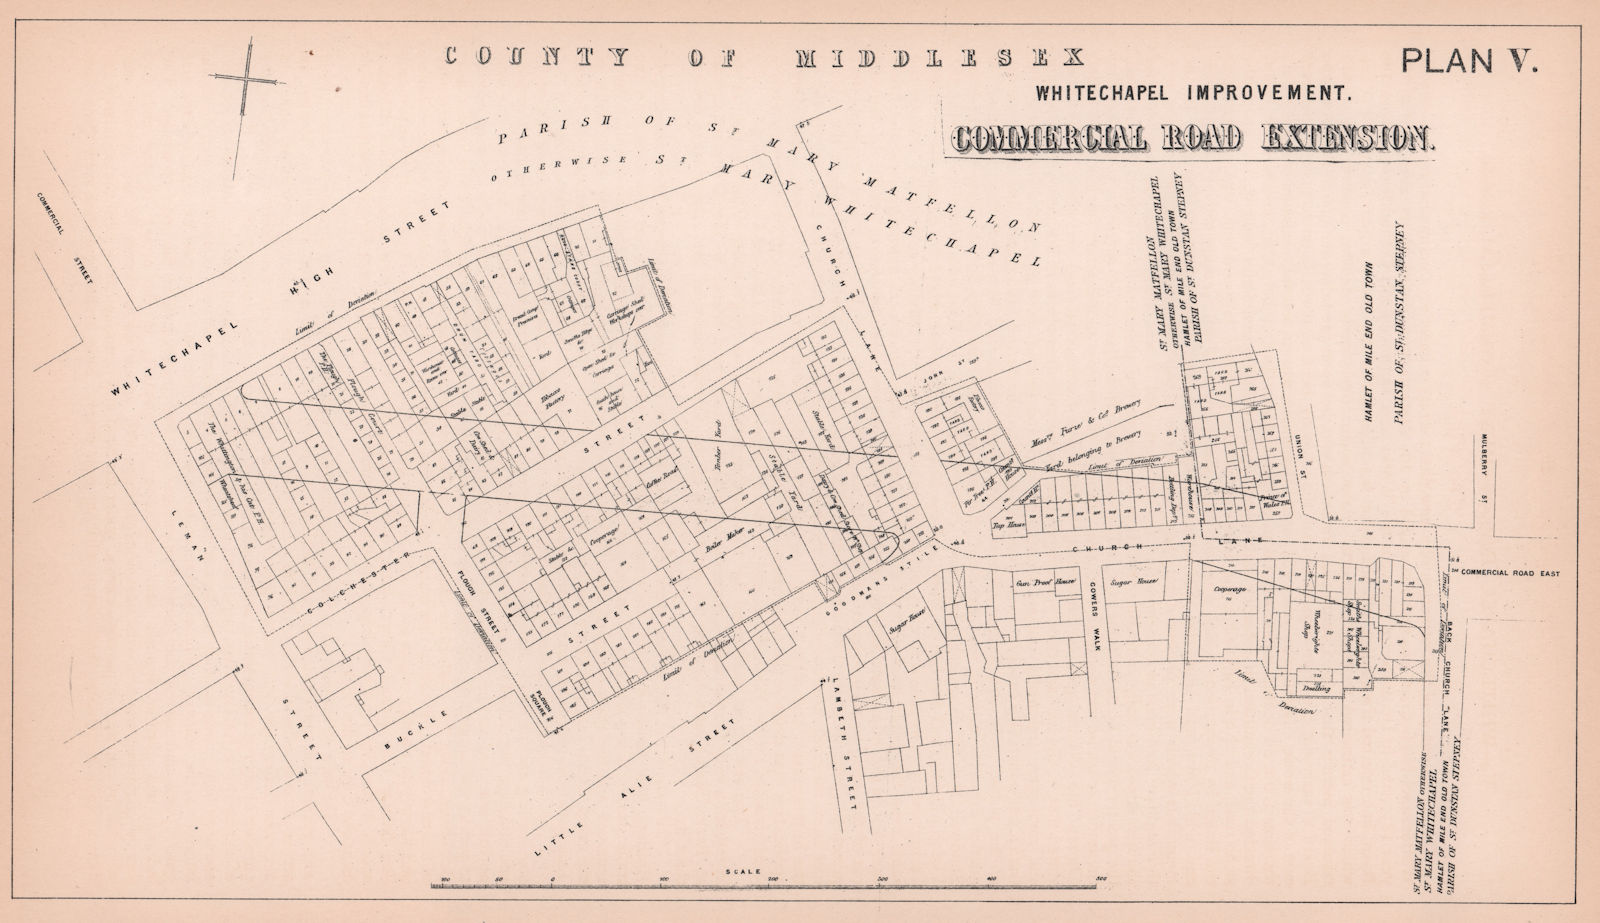 Associate Product 1870 Commercial Road Extension to Whitechapel High Street 1898 old antique map